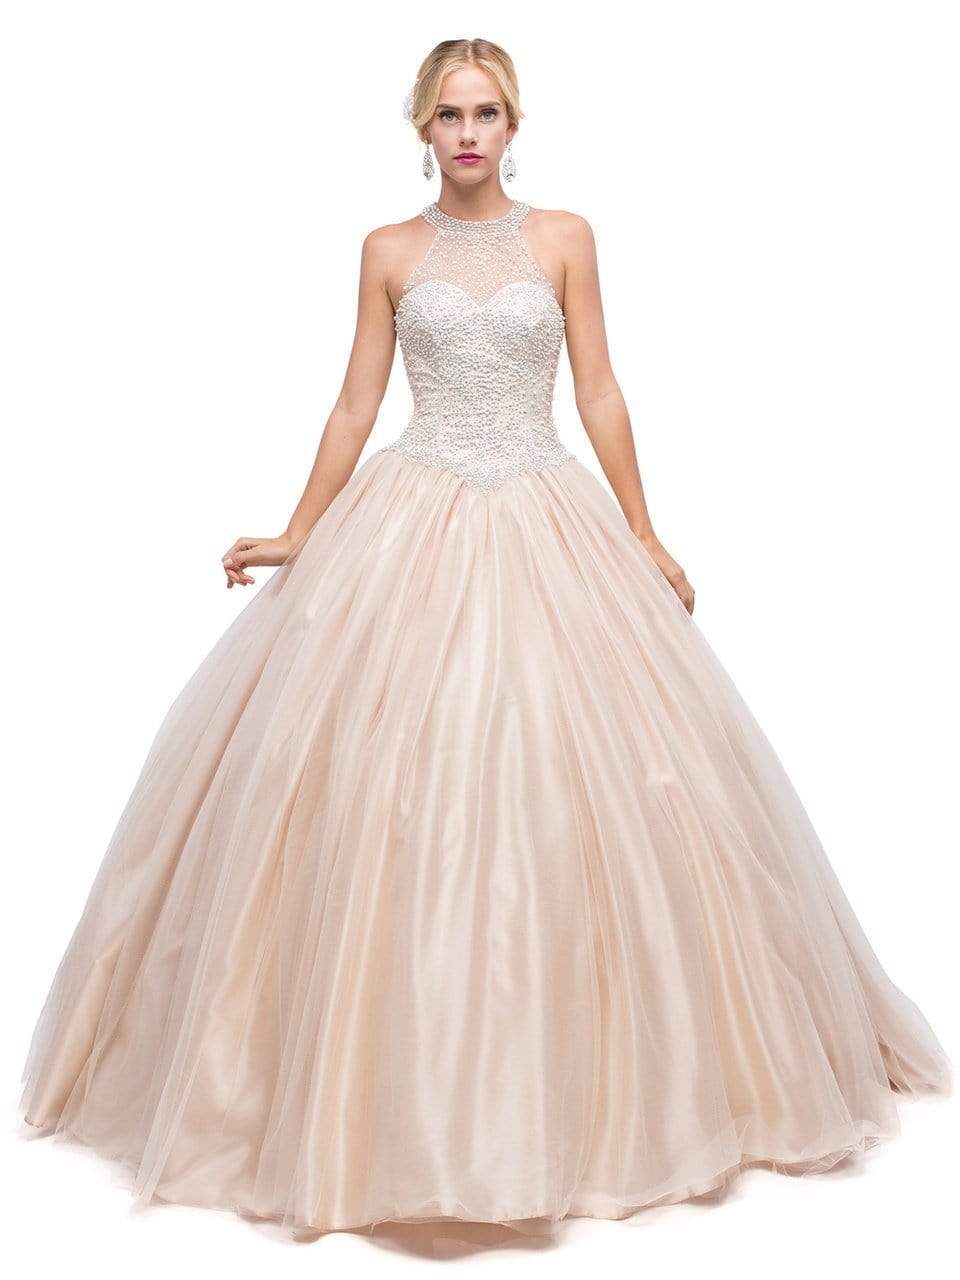 Dancing Queen Bridal - 1169 Sophisticated Halter Illusion Long Gown Special Occasion Dress XS / Champagne